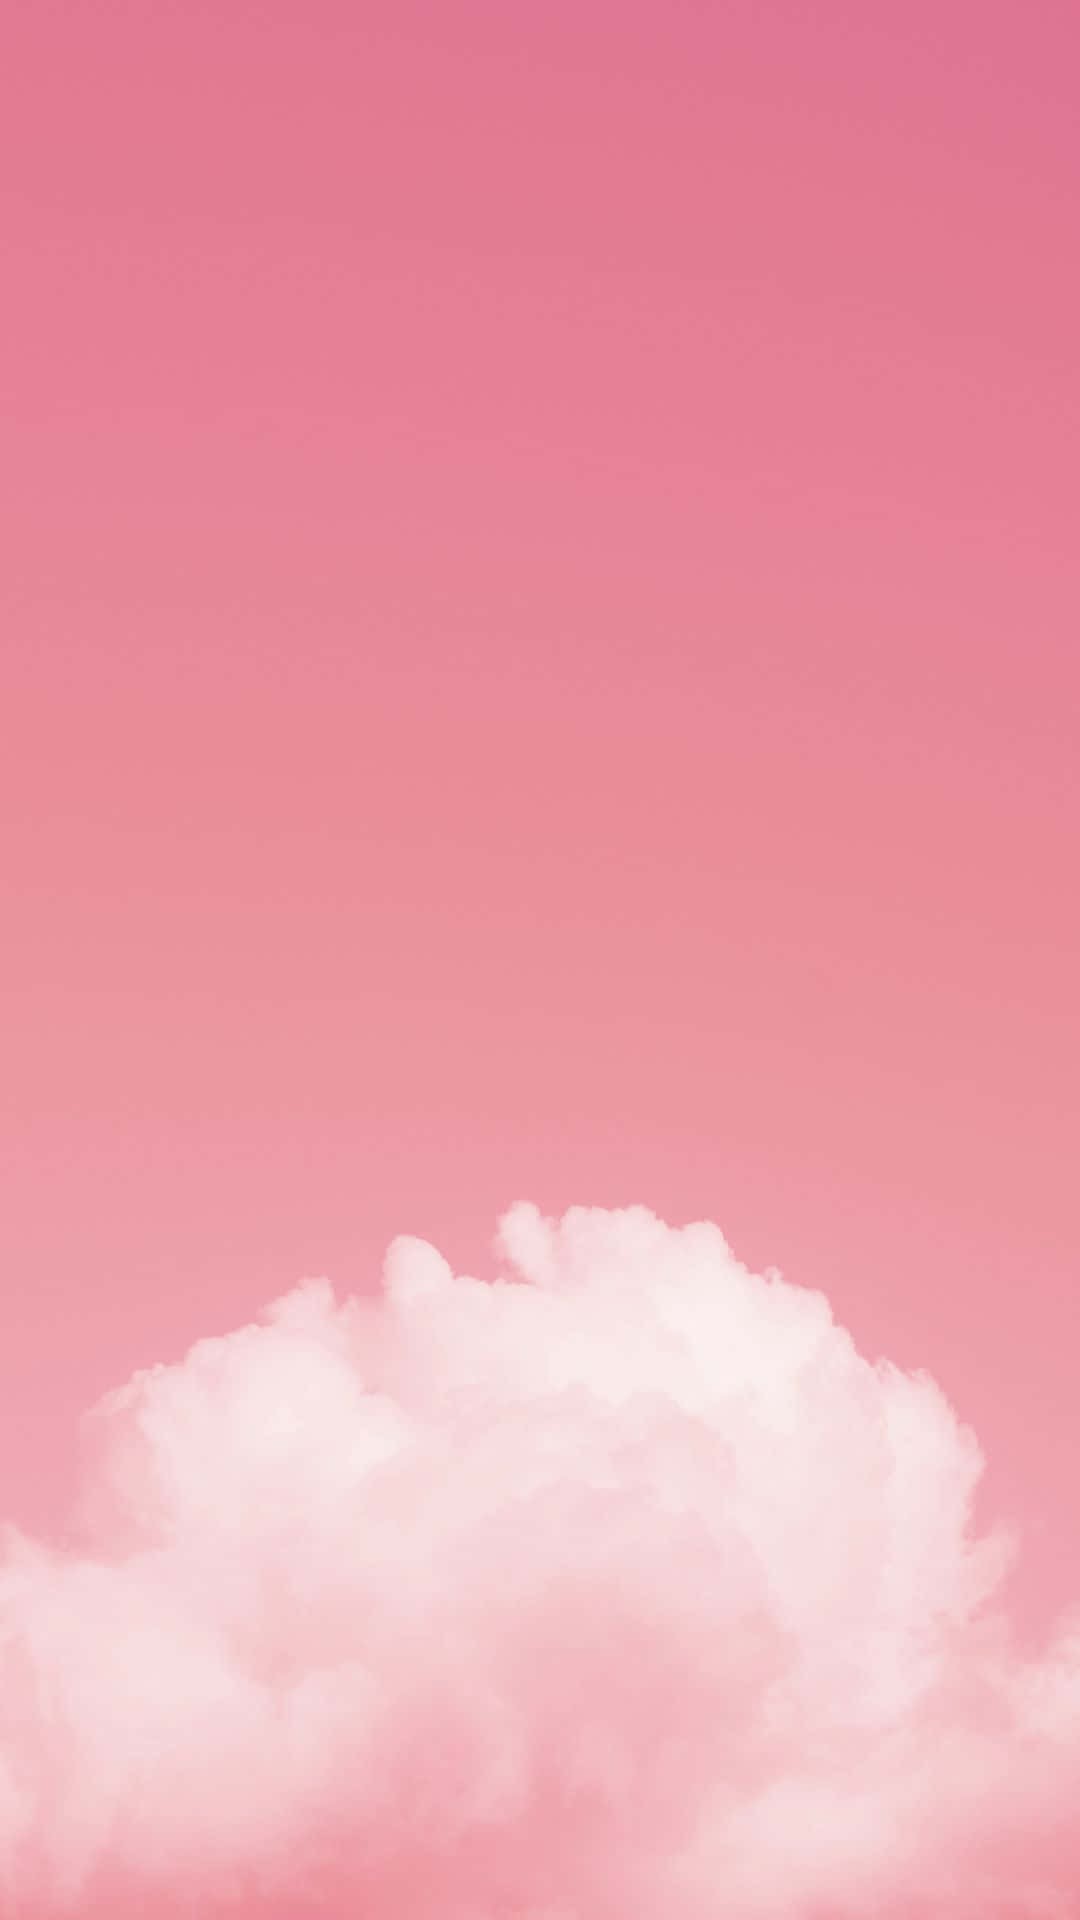 Taking in a beautiful sky full of clouds Wallpaper